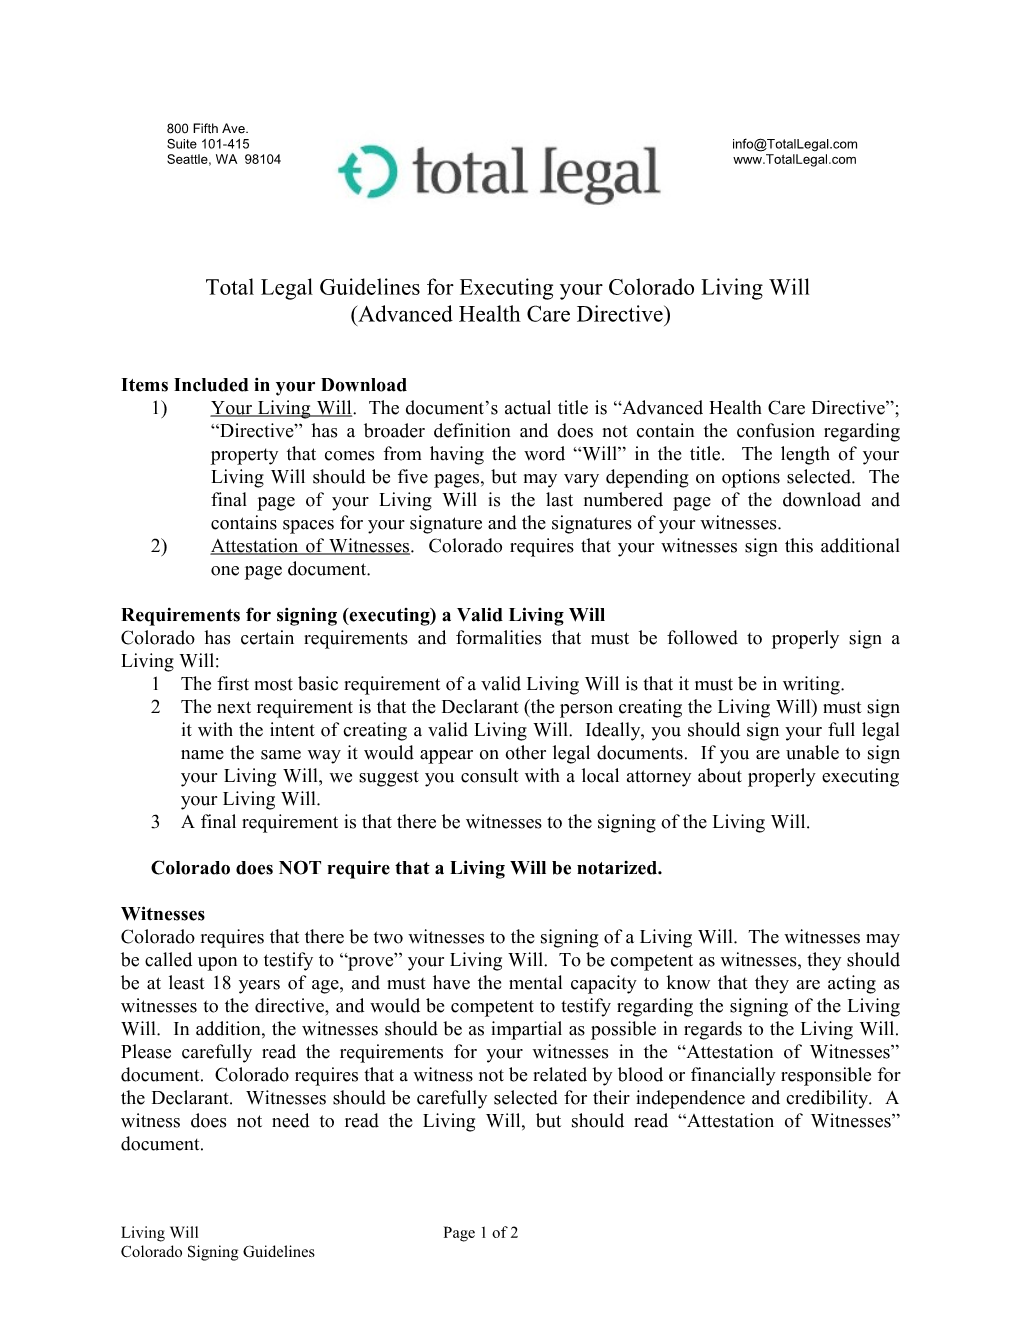 Total Legal Guidelines for Executing Your Colorado Living Will